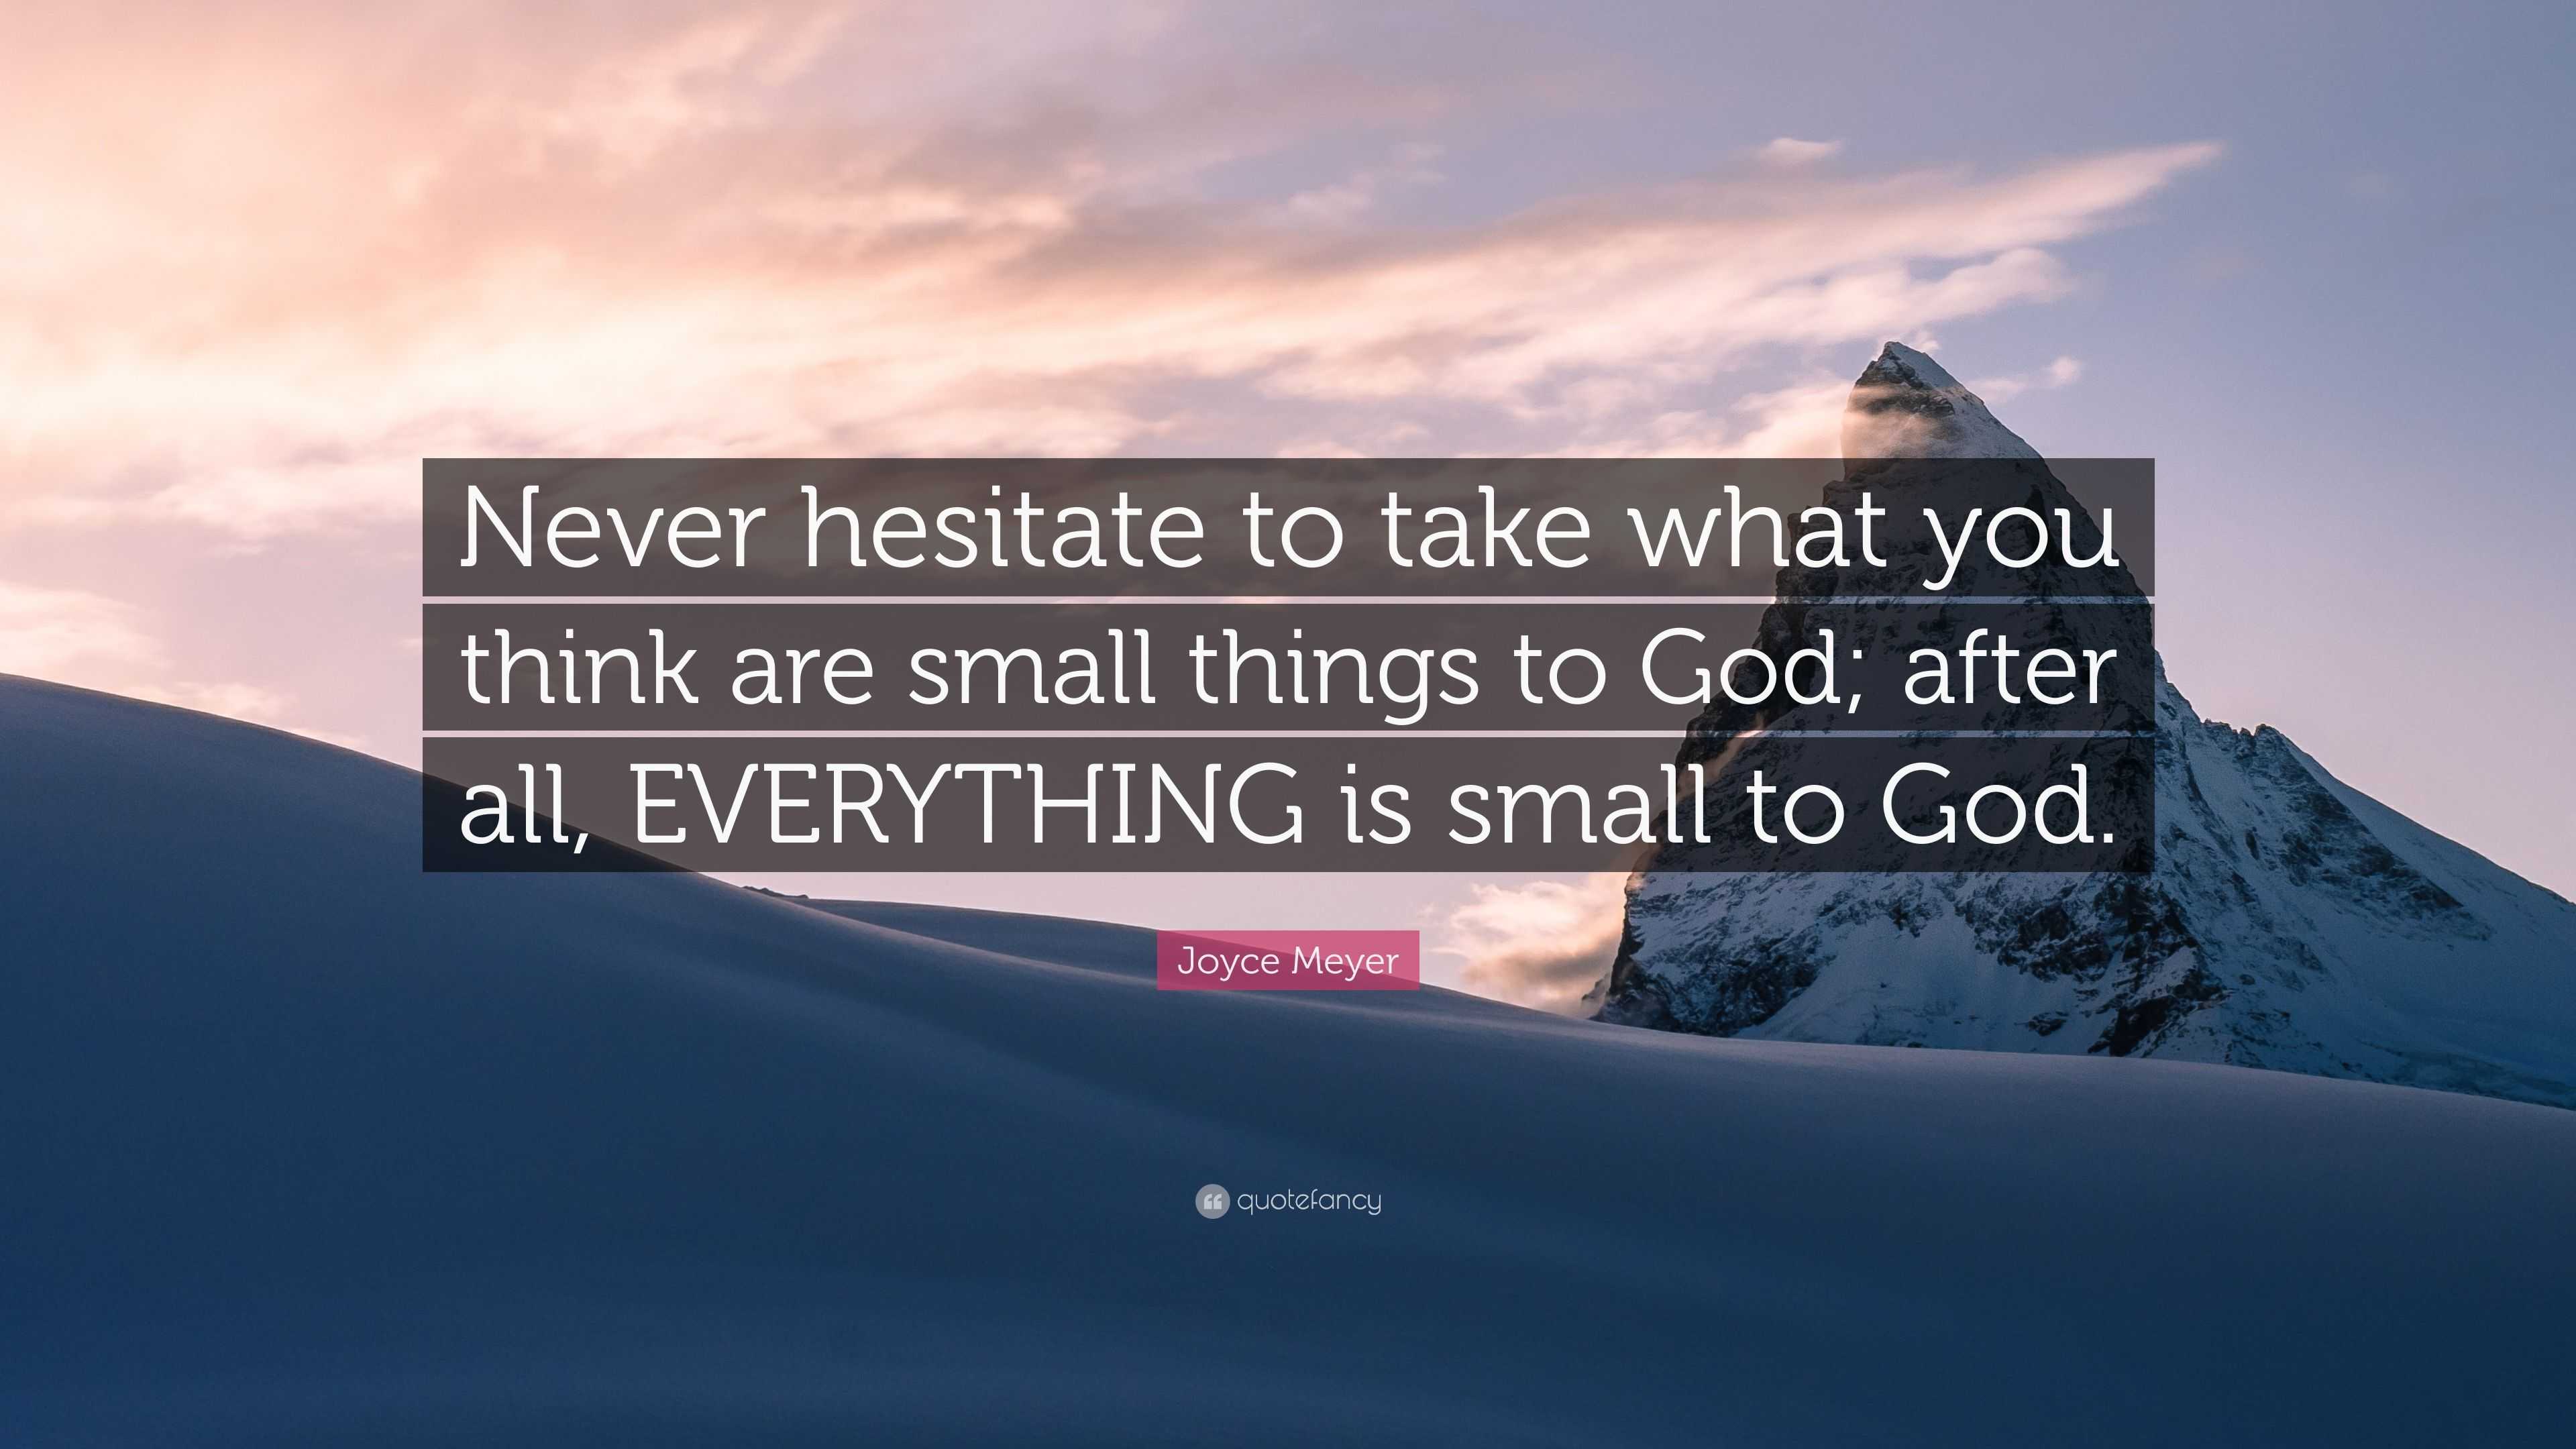 Joyce Meyer Quote: “Never hesitate to take what you think are small ...